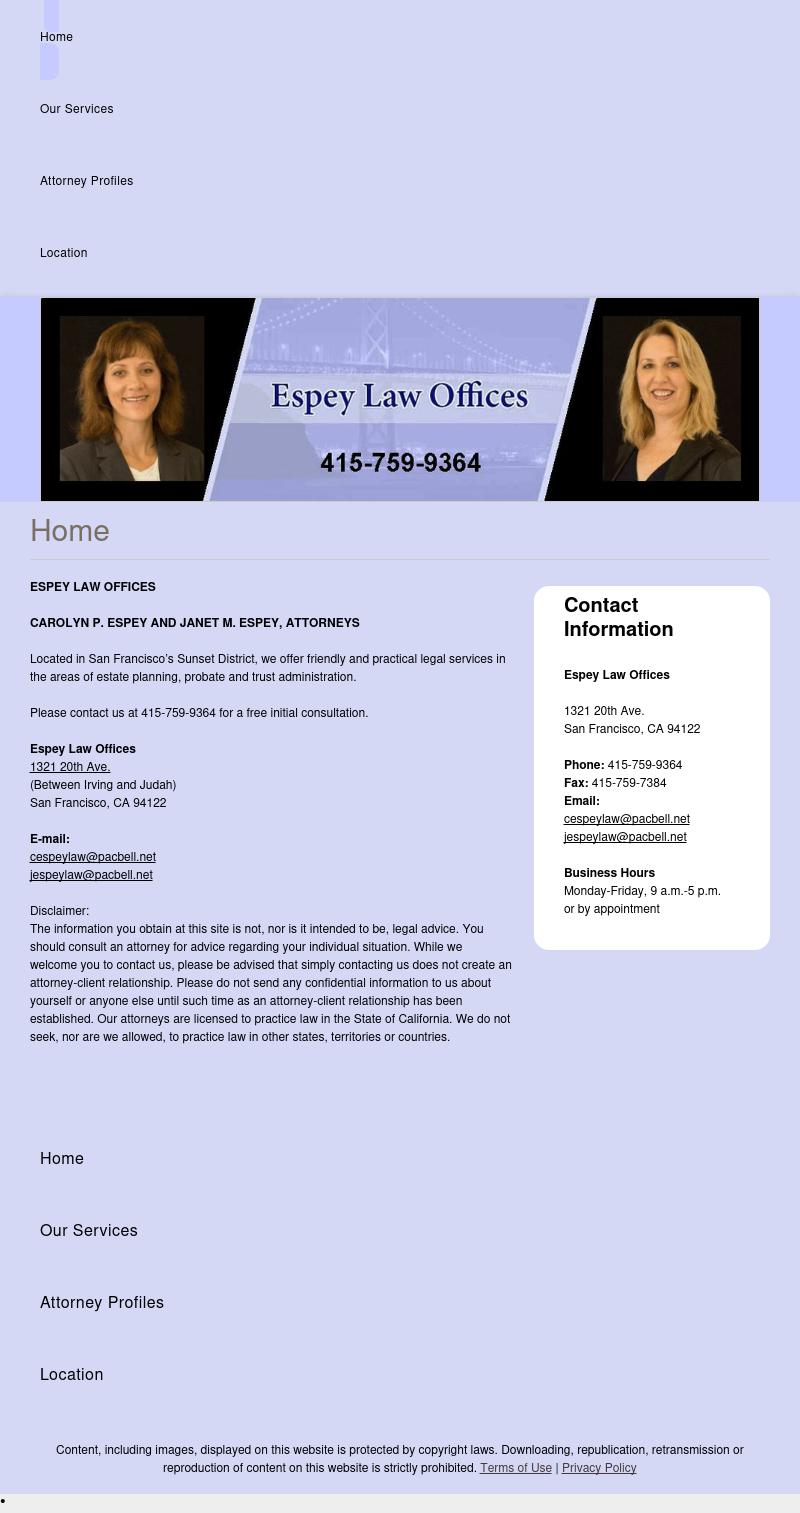 Espey Law Offices - San Francisco CA Lawyers